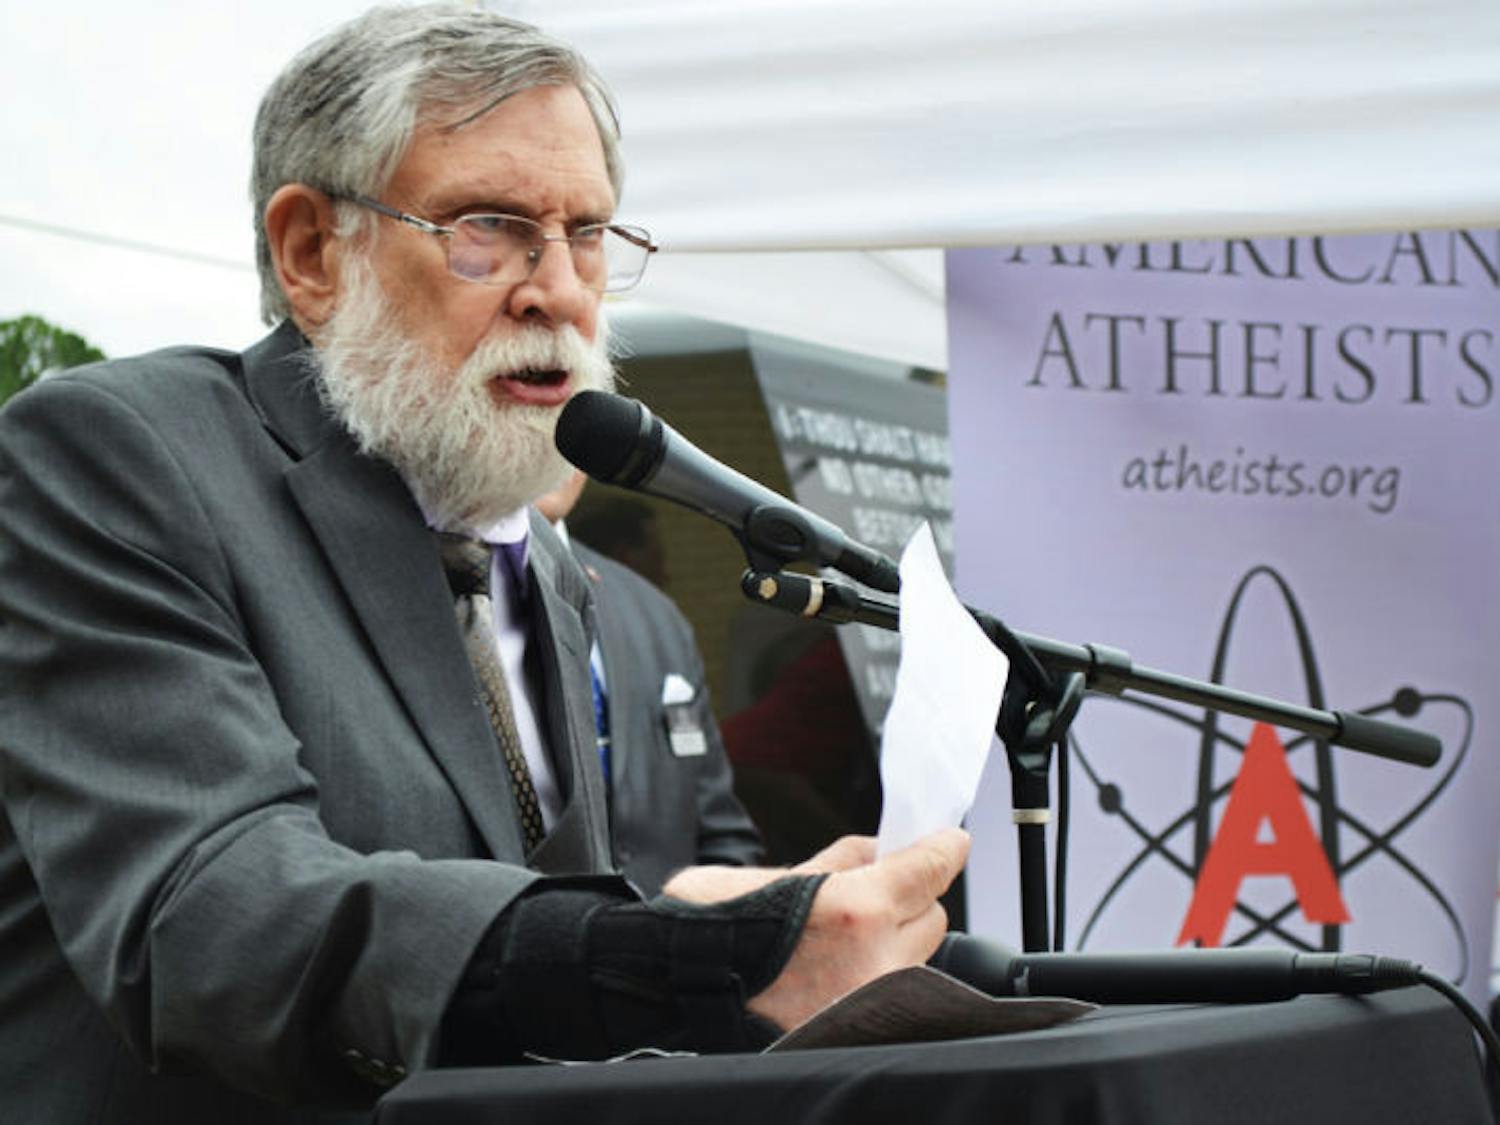 Edwin Kagin, J.D., National Legal Director of American Atheists, speaks at the Bradford County Courthouse on Saturday during a dedication ceremony for an atheist monument.&nbsp;
&nbsp;